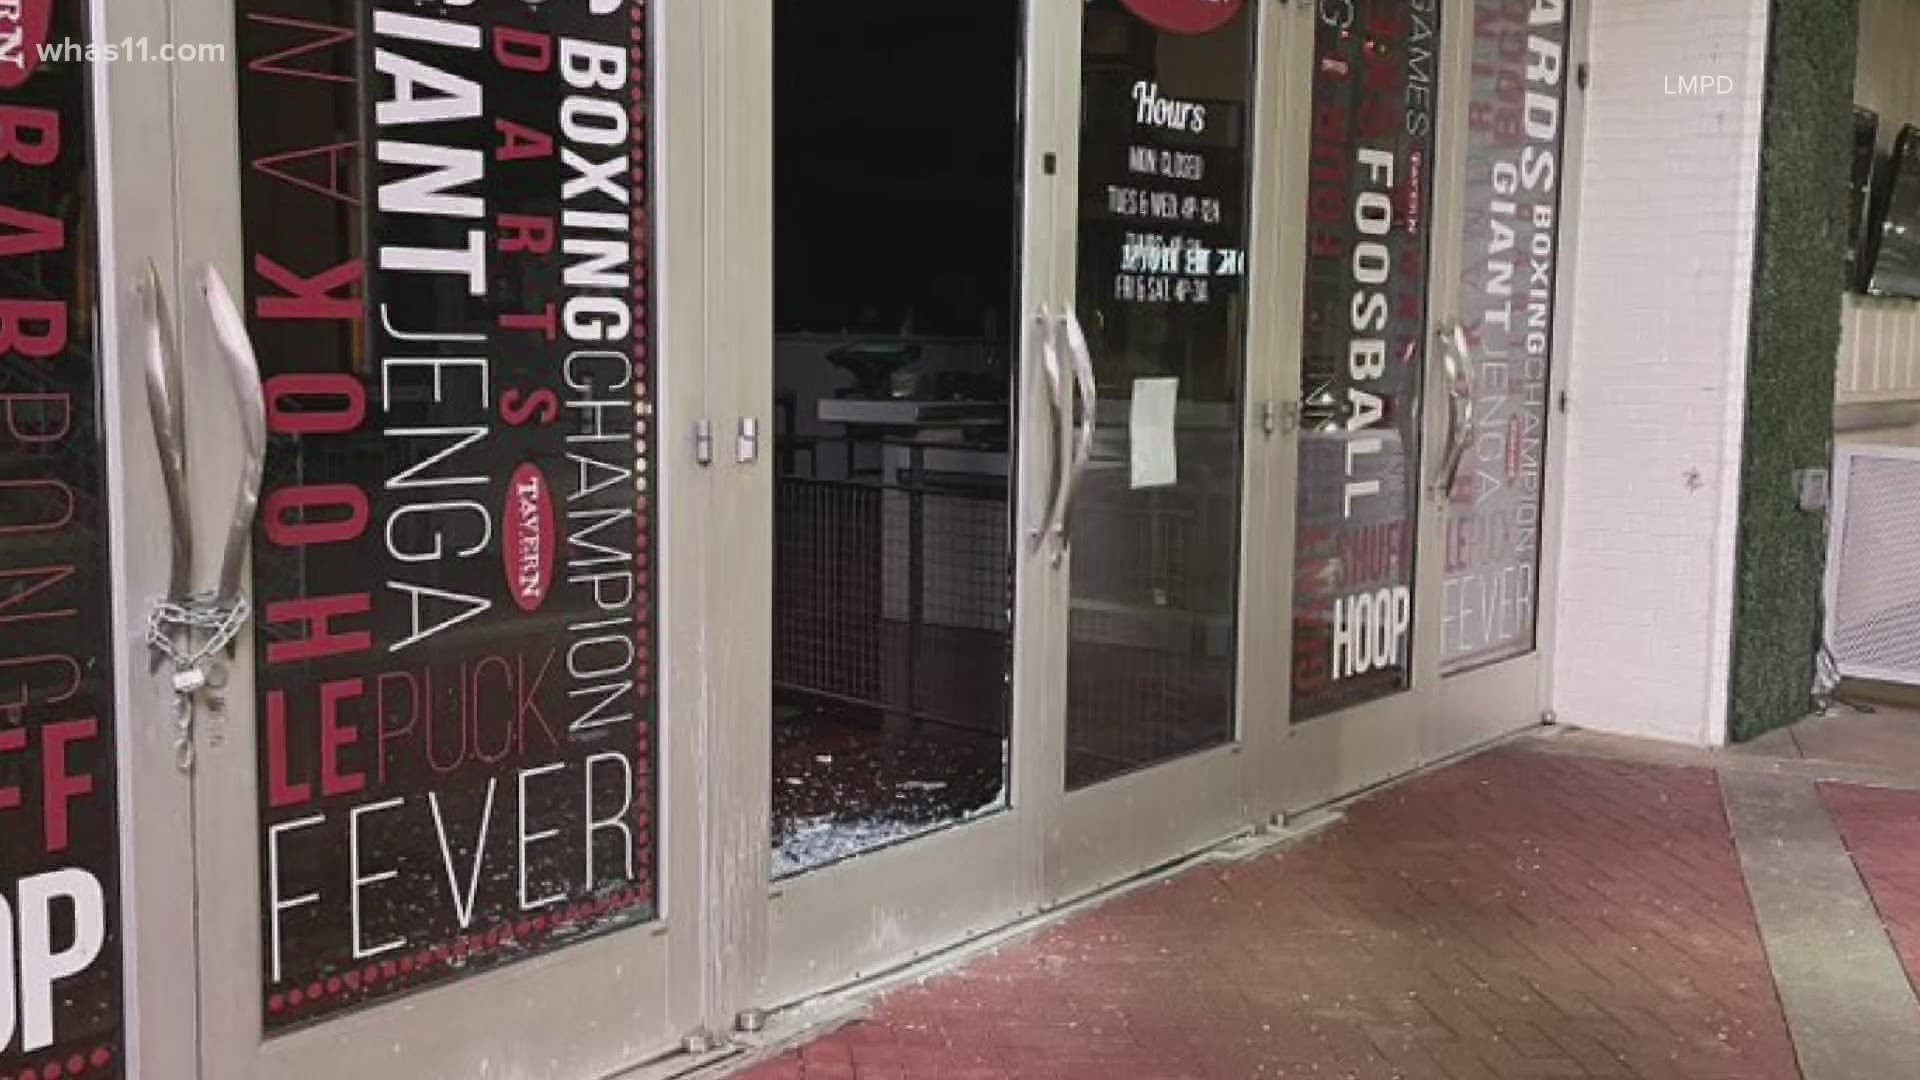 LMPD posted photos on their Facebook page showing windows posted out at several businesses around Fourth Street Live.